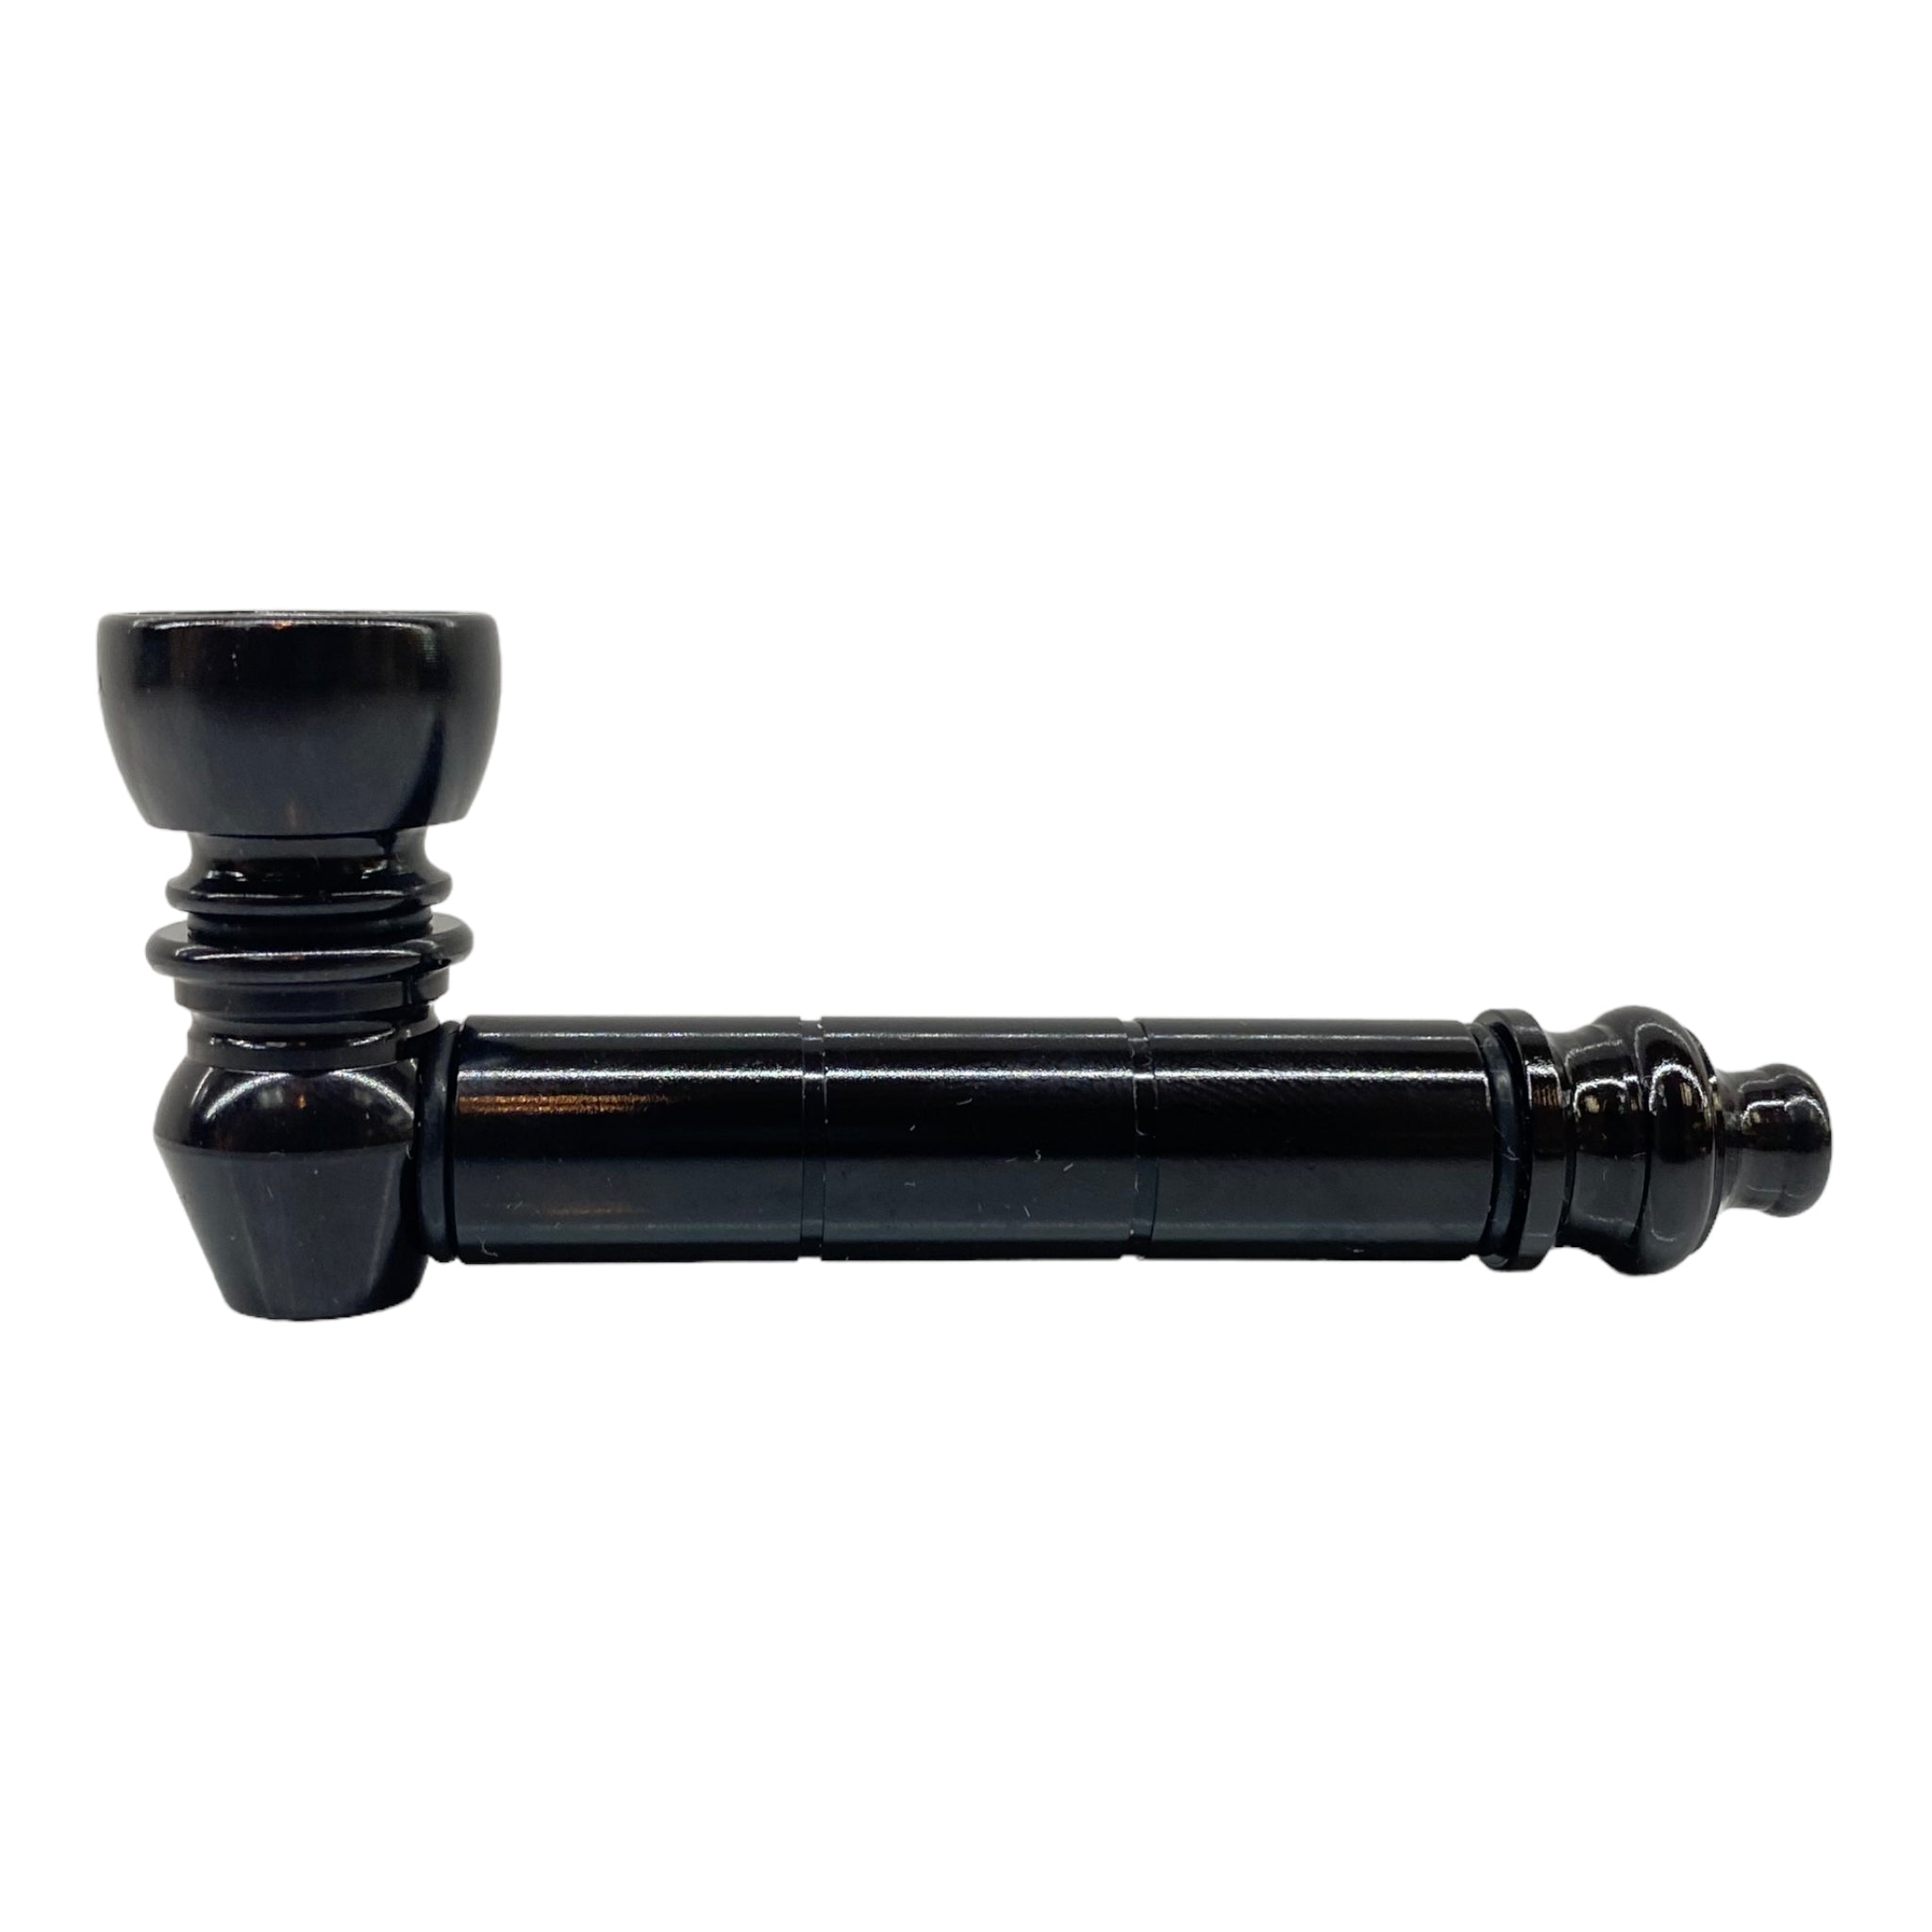 Metal Hand Pipes - Black Basic Metal Pipe With Small Chamber